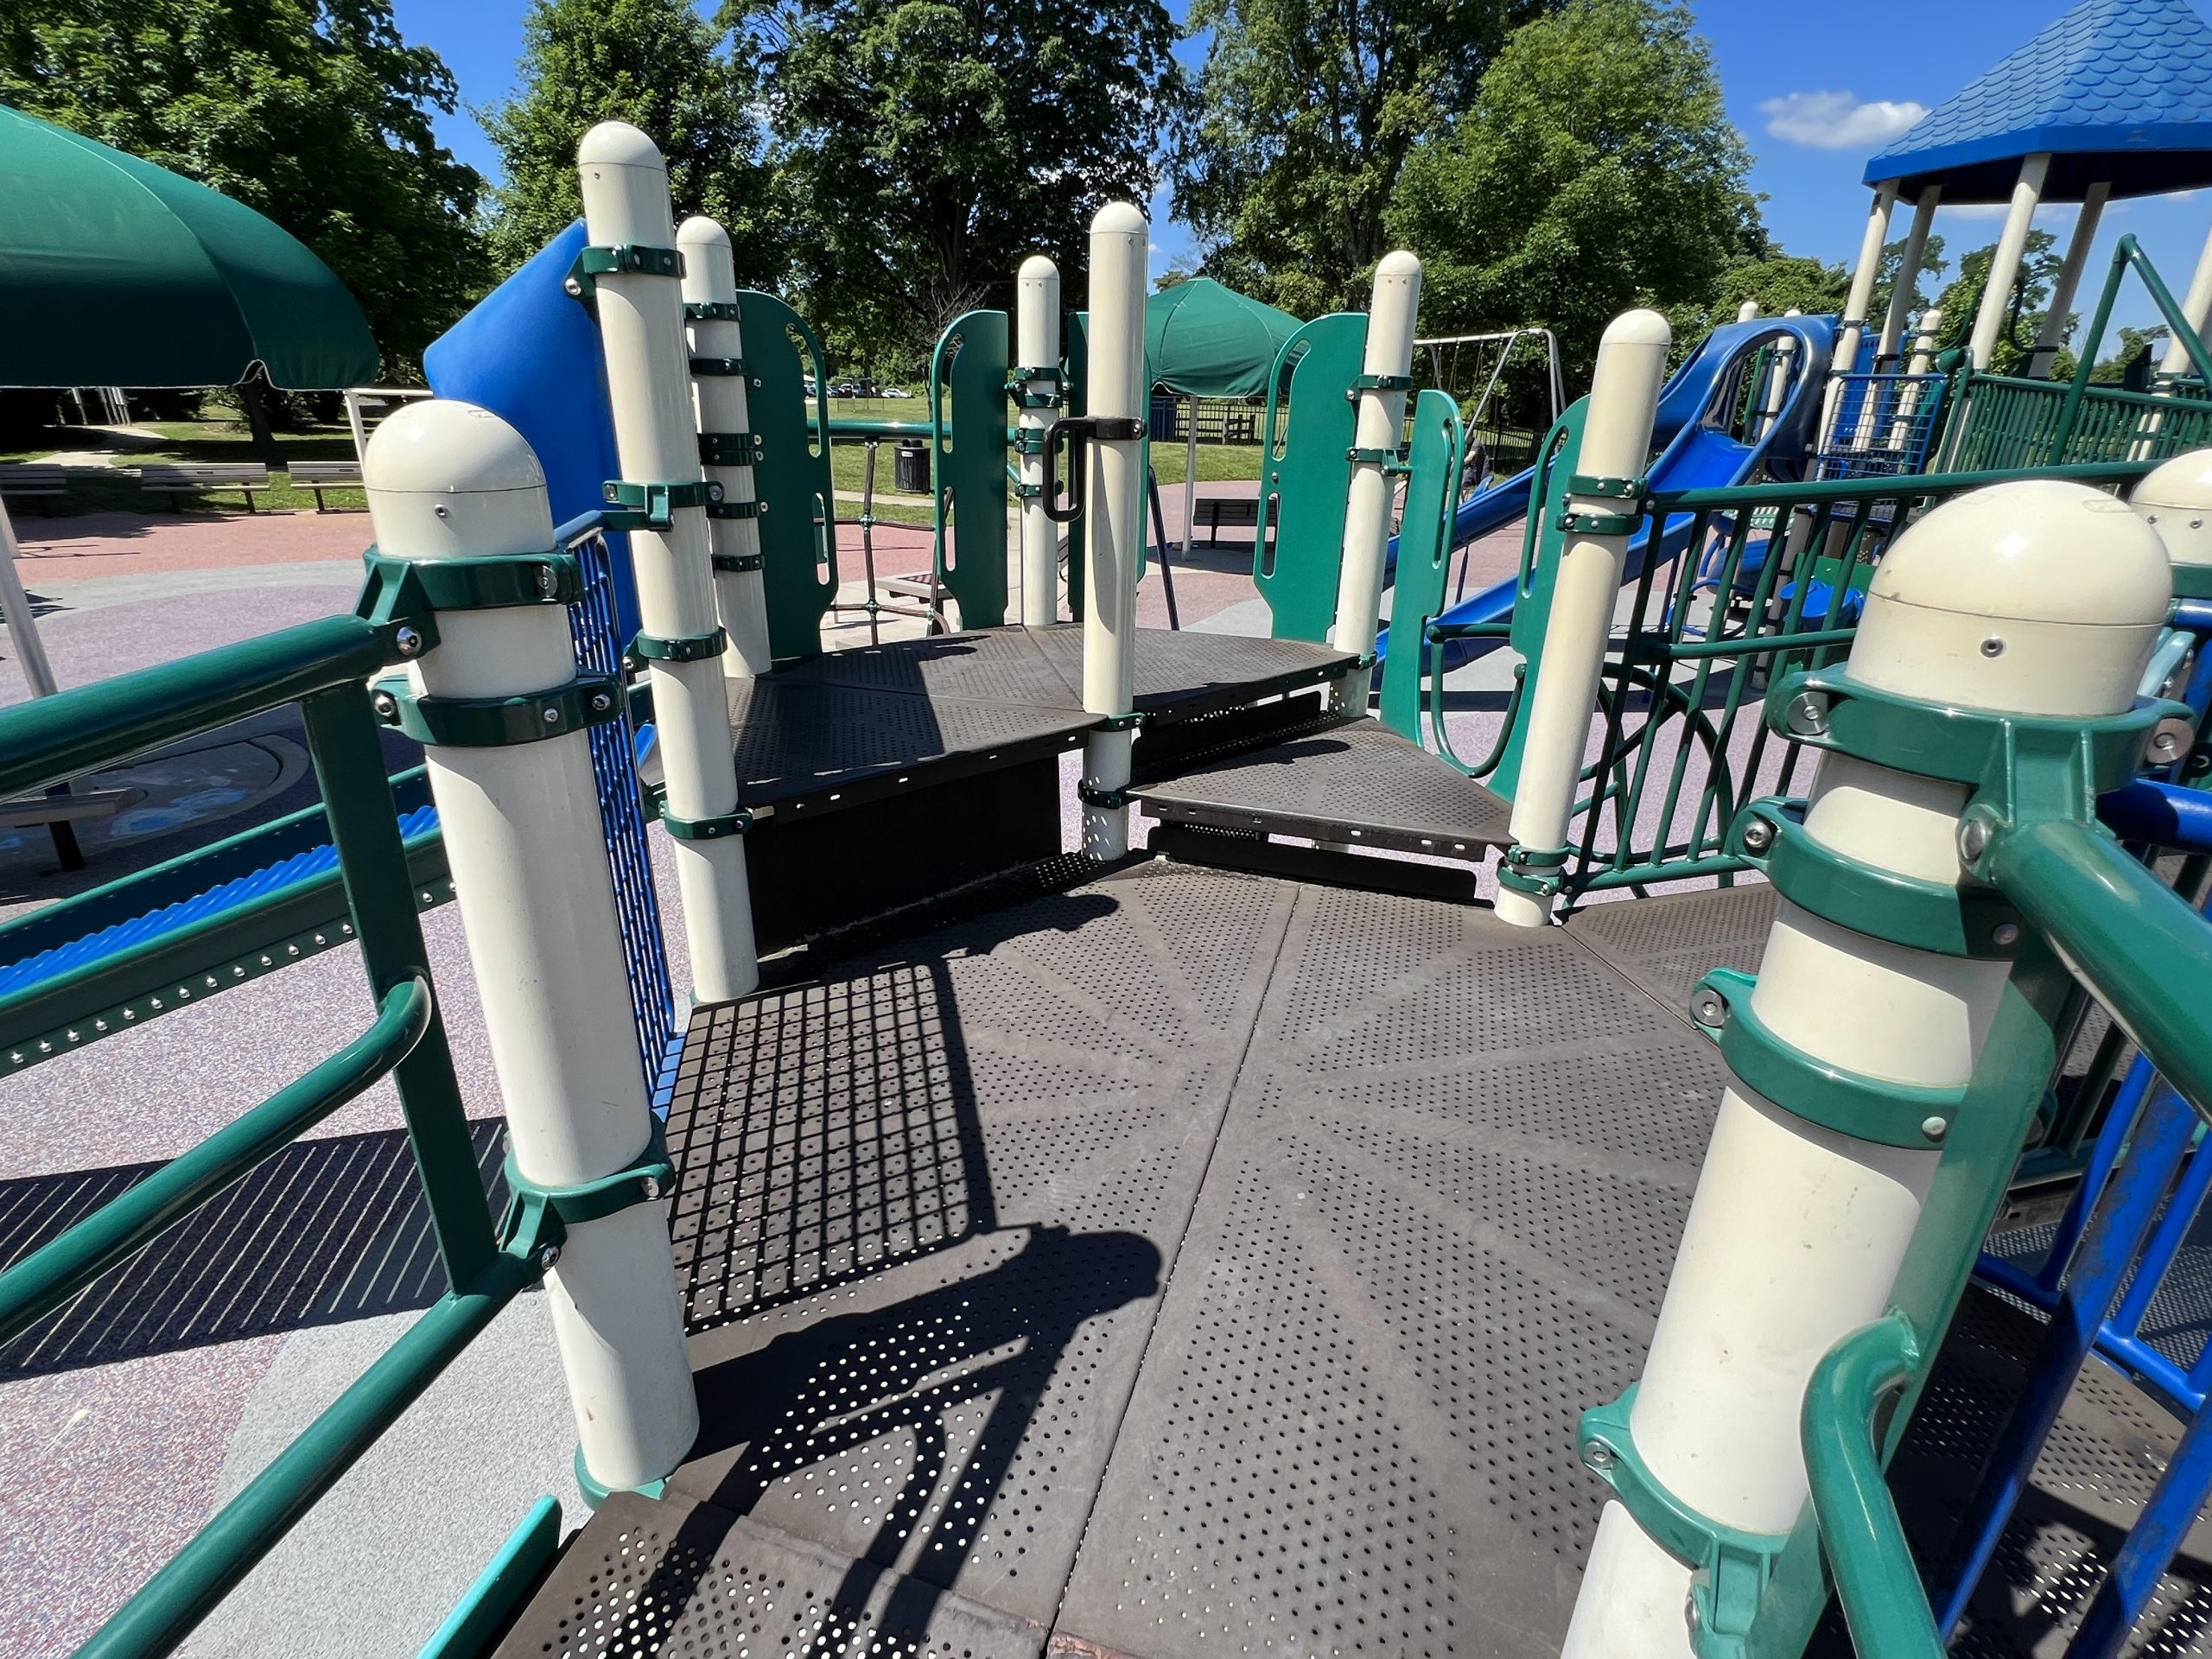 Challenger Place Park Playground in Colts Neck NJ wide platforms 2